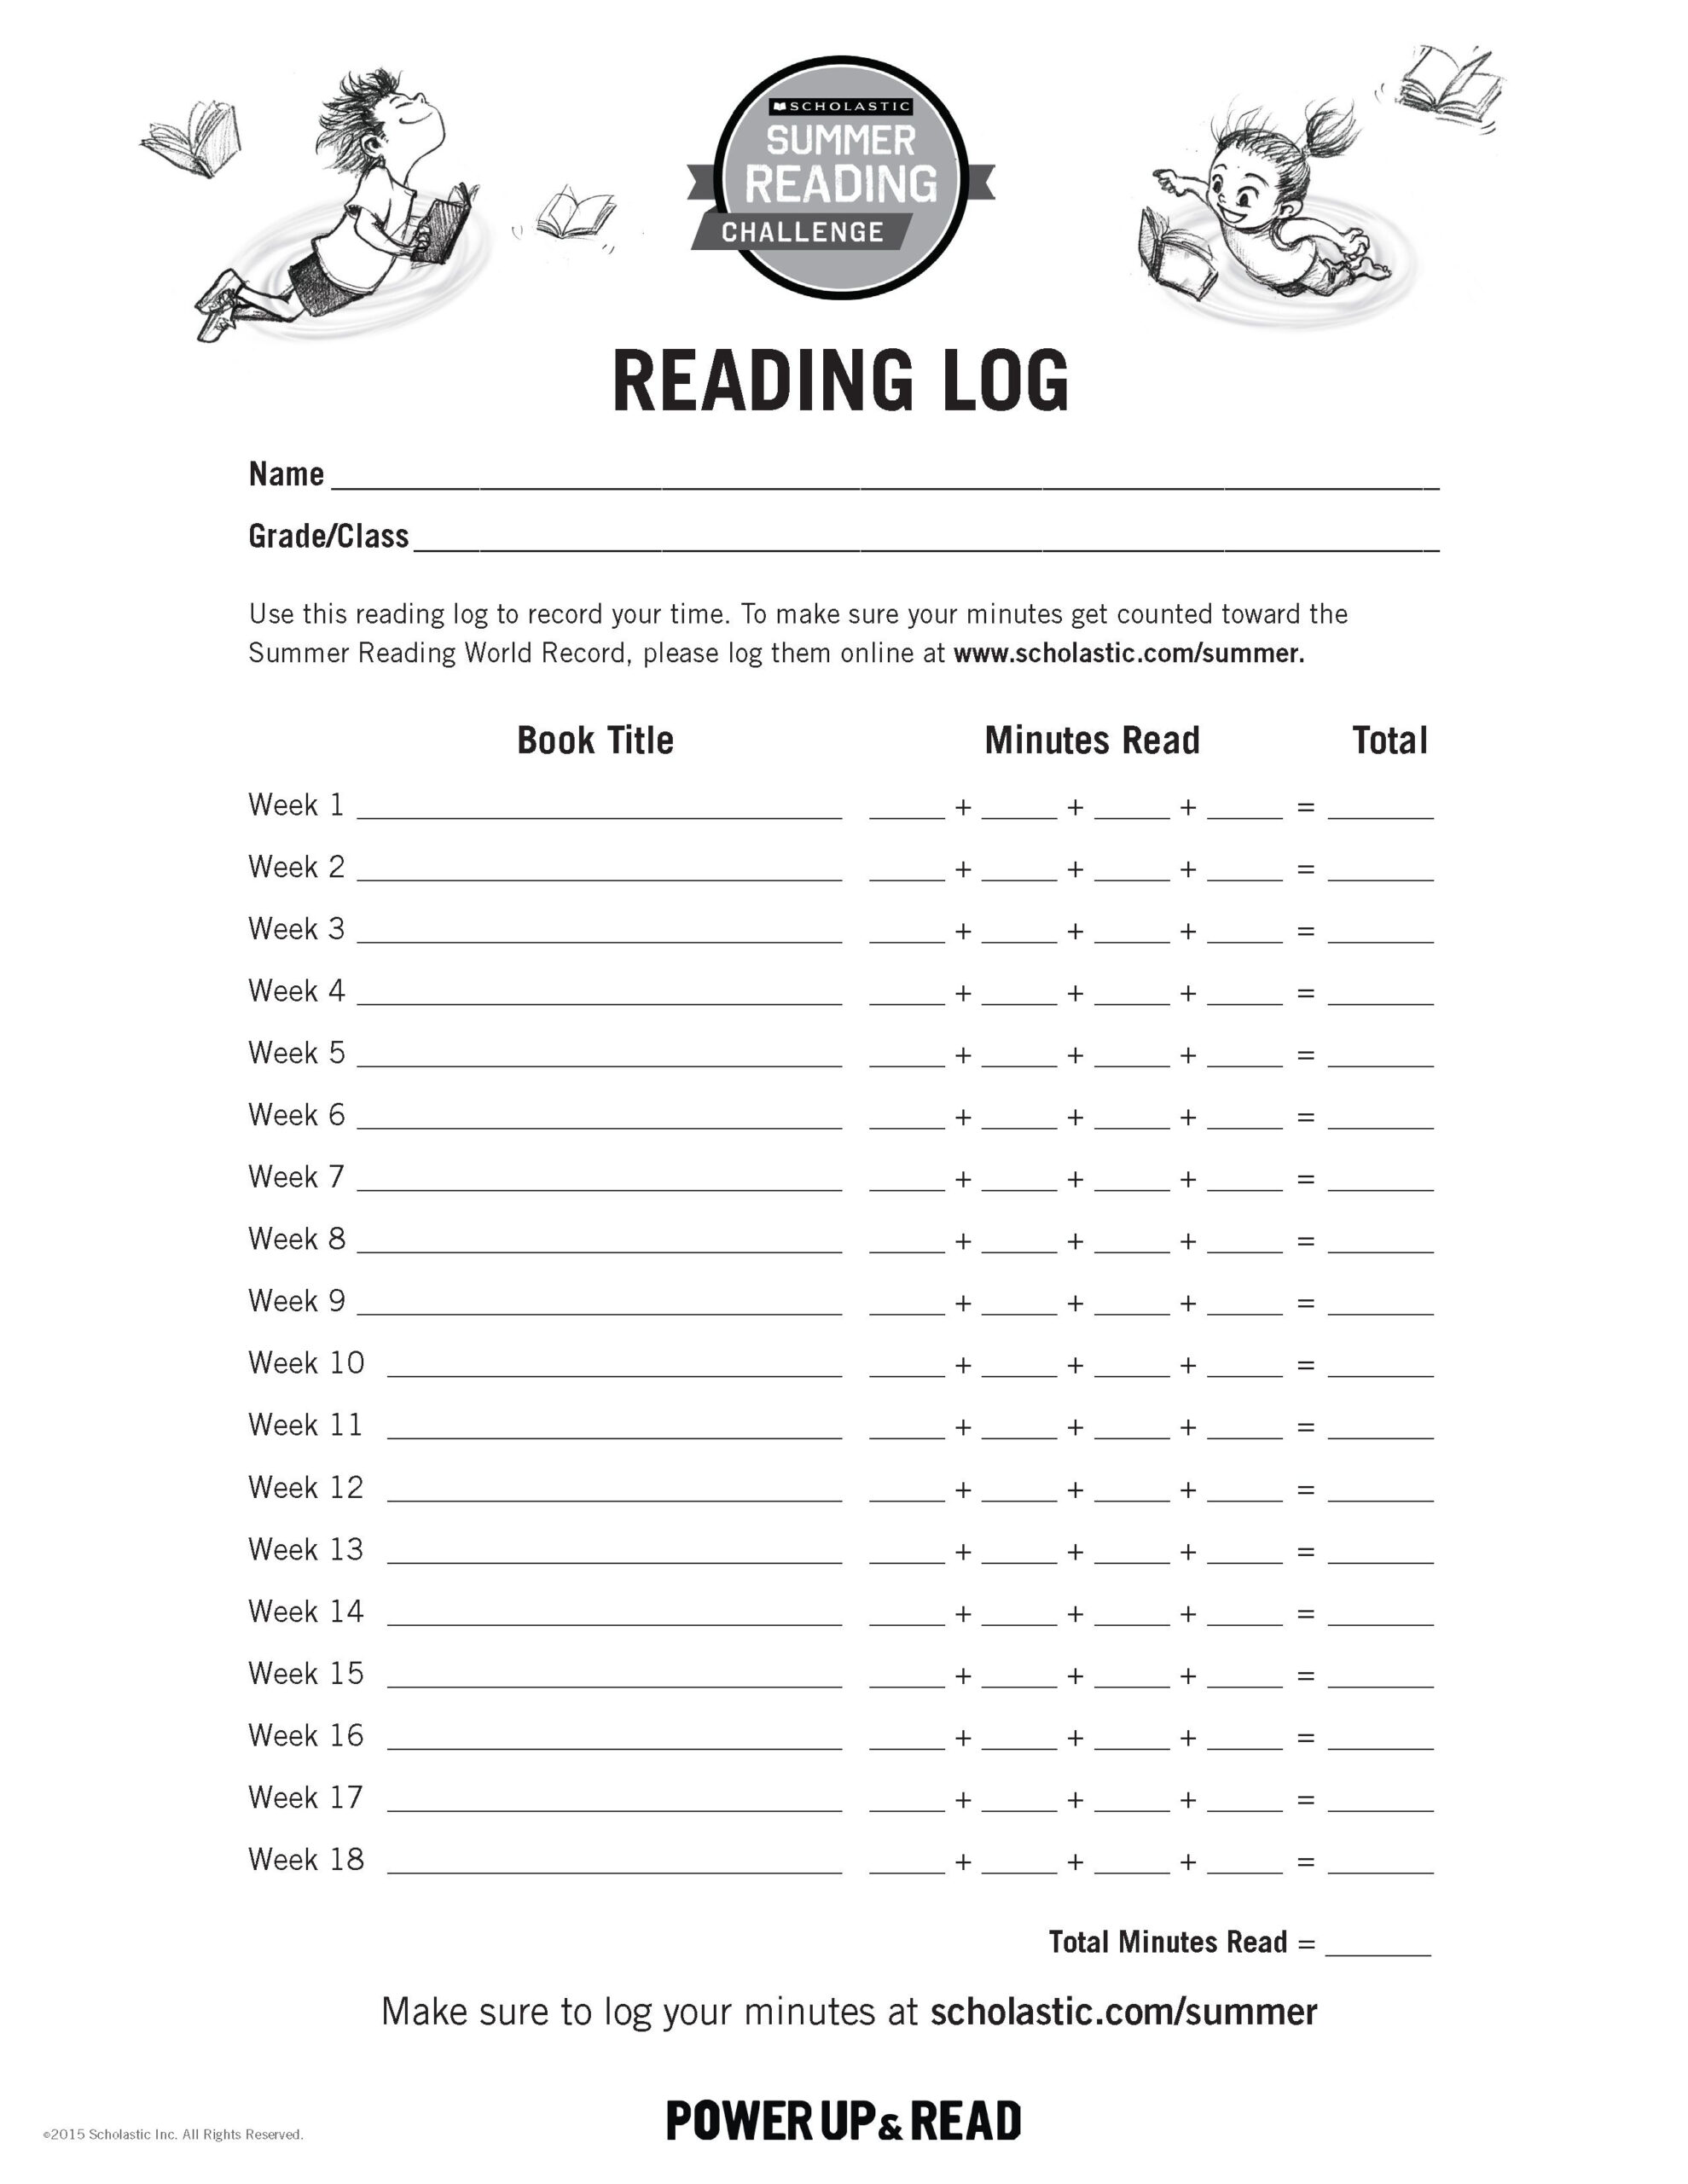 Reading Log Summer Reading Challenge 2015 Kids Can Track Their